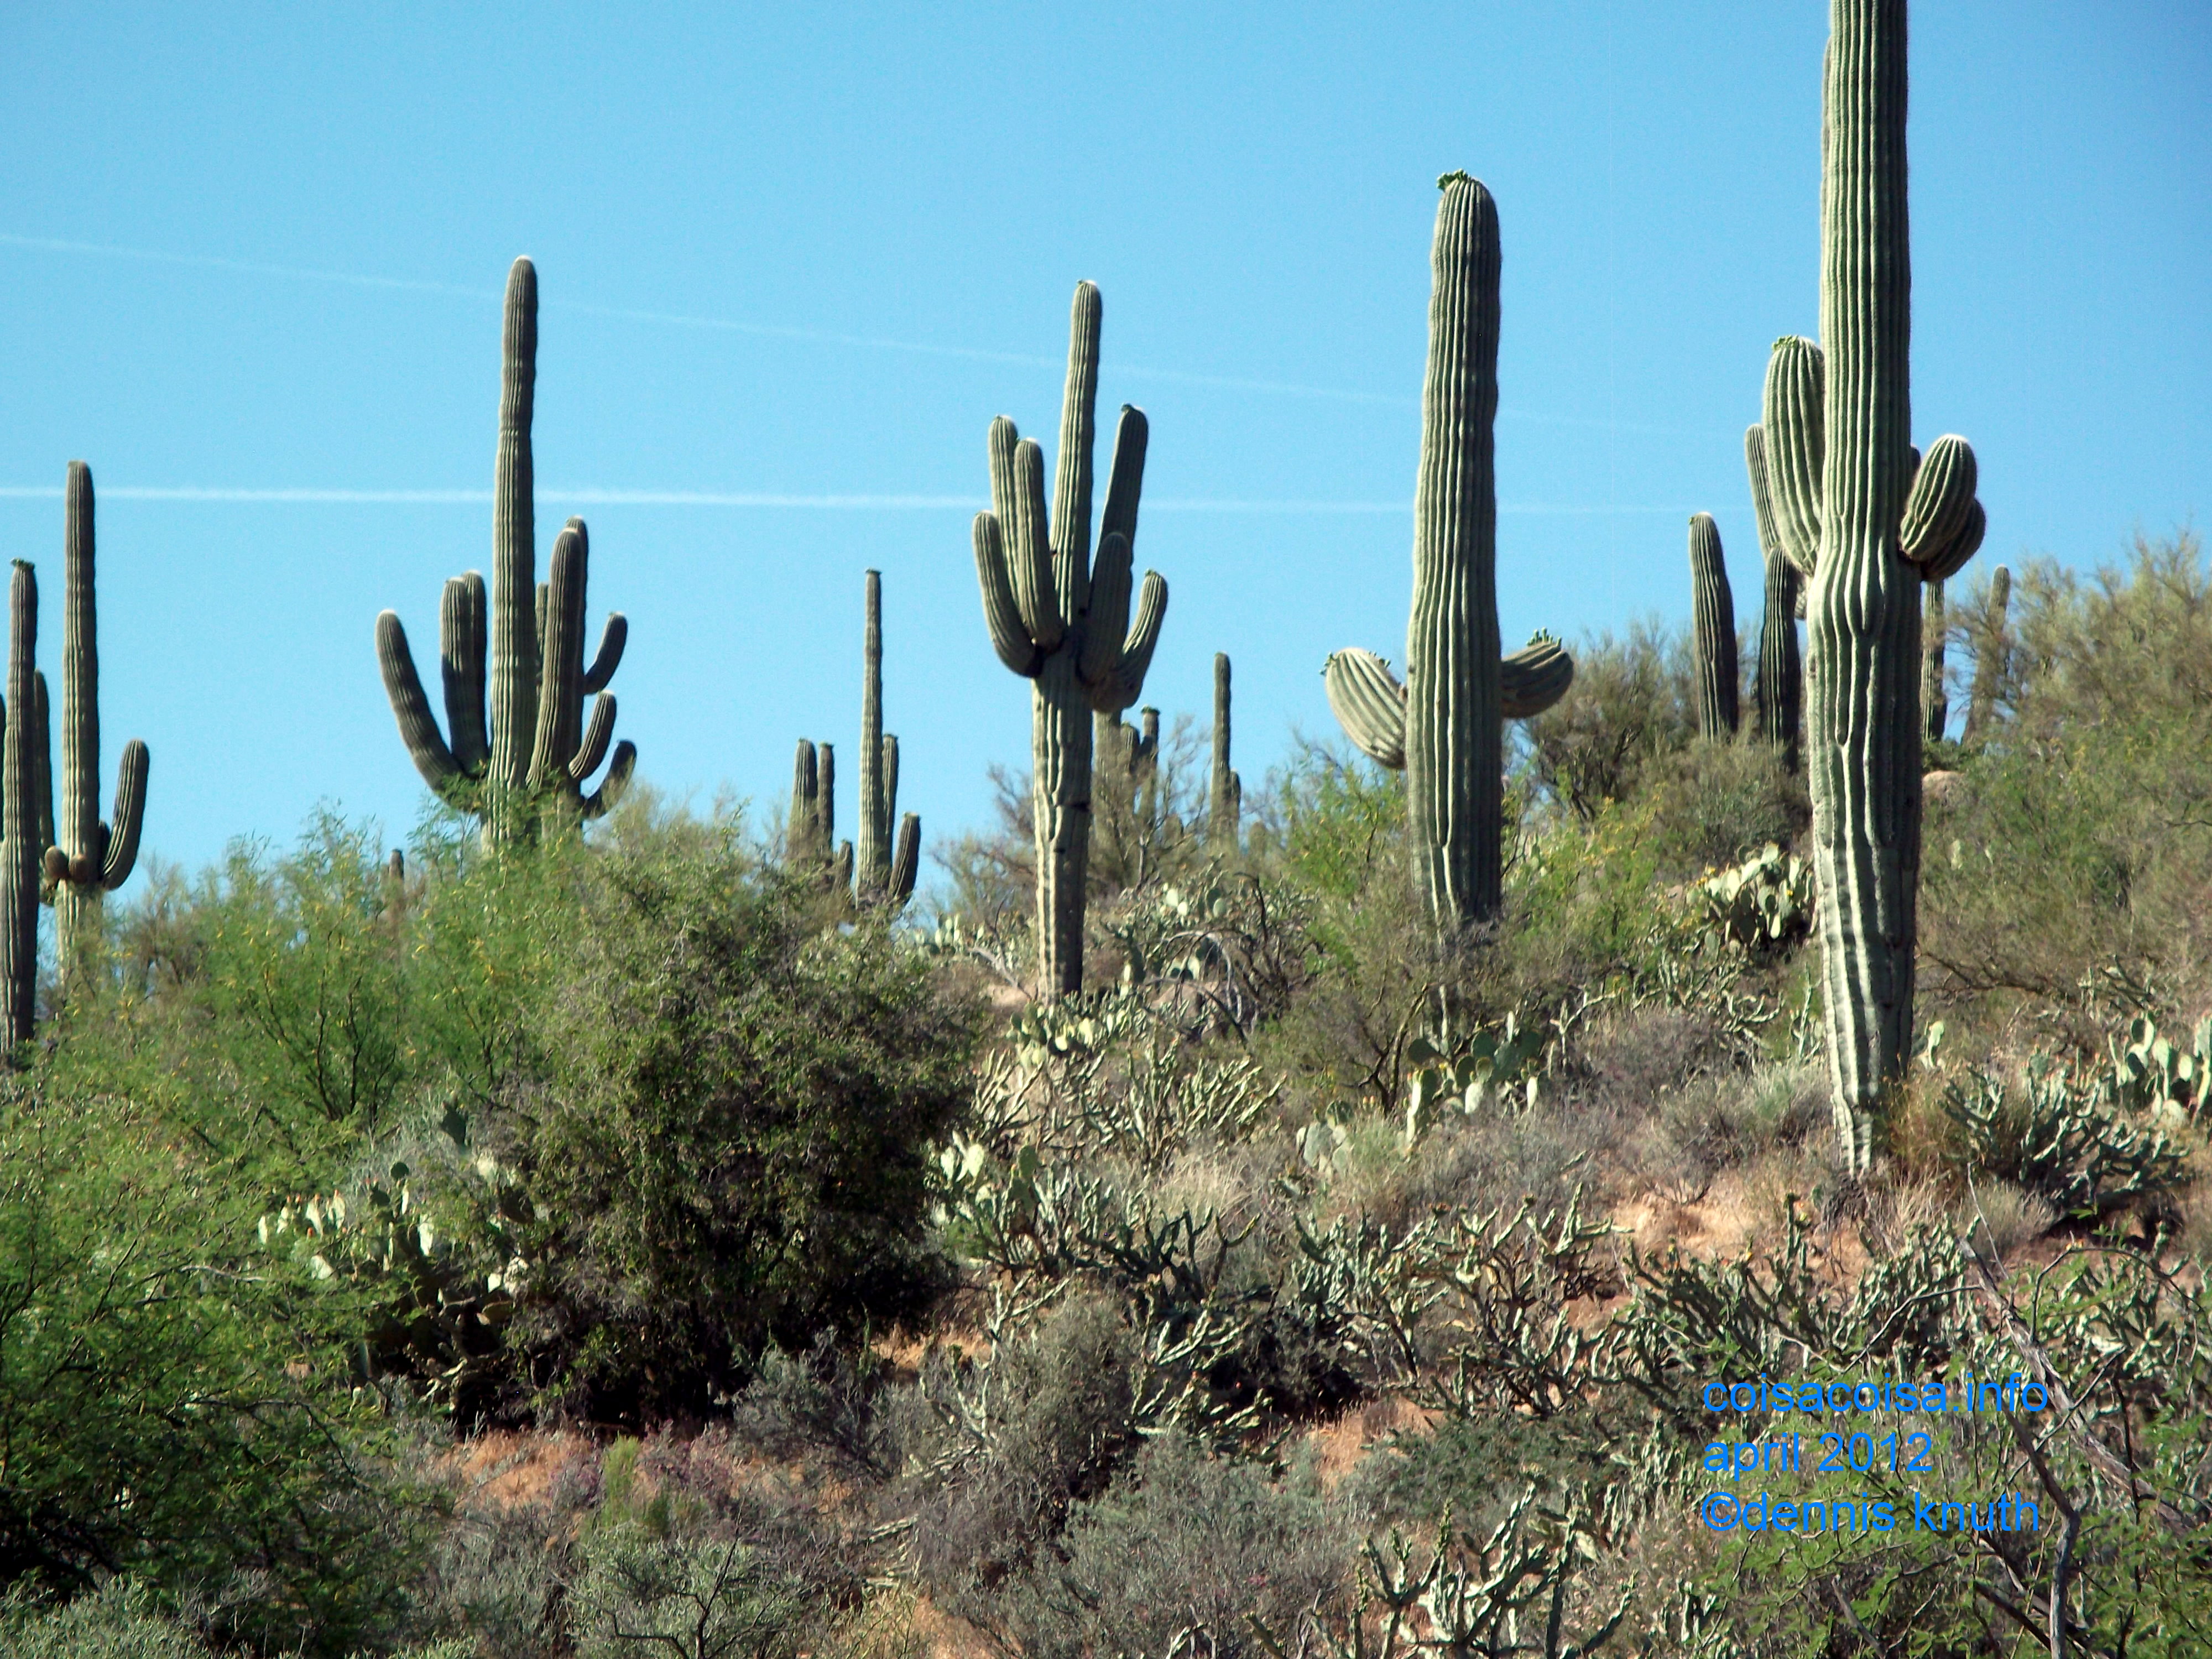 Saguaro cactus in a desert forest between Payson and Phoenix